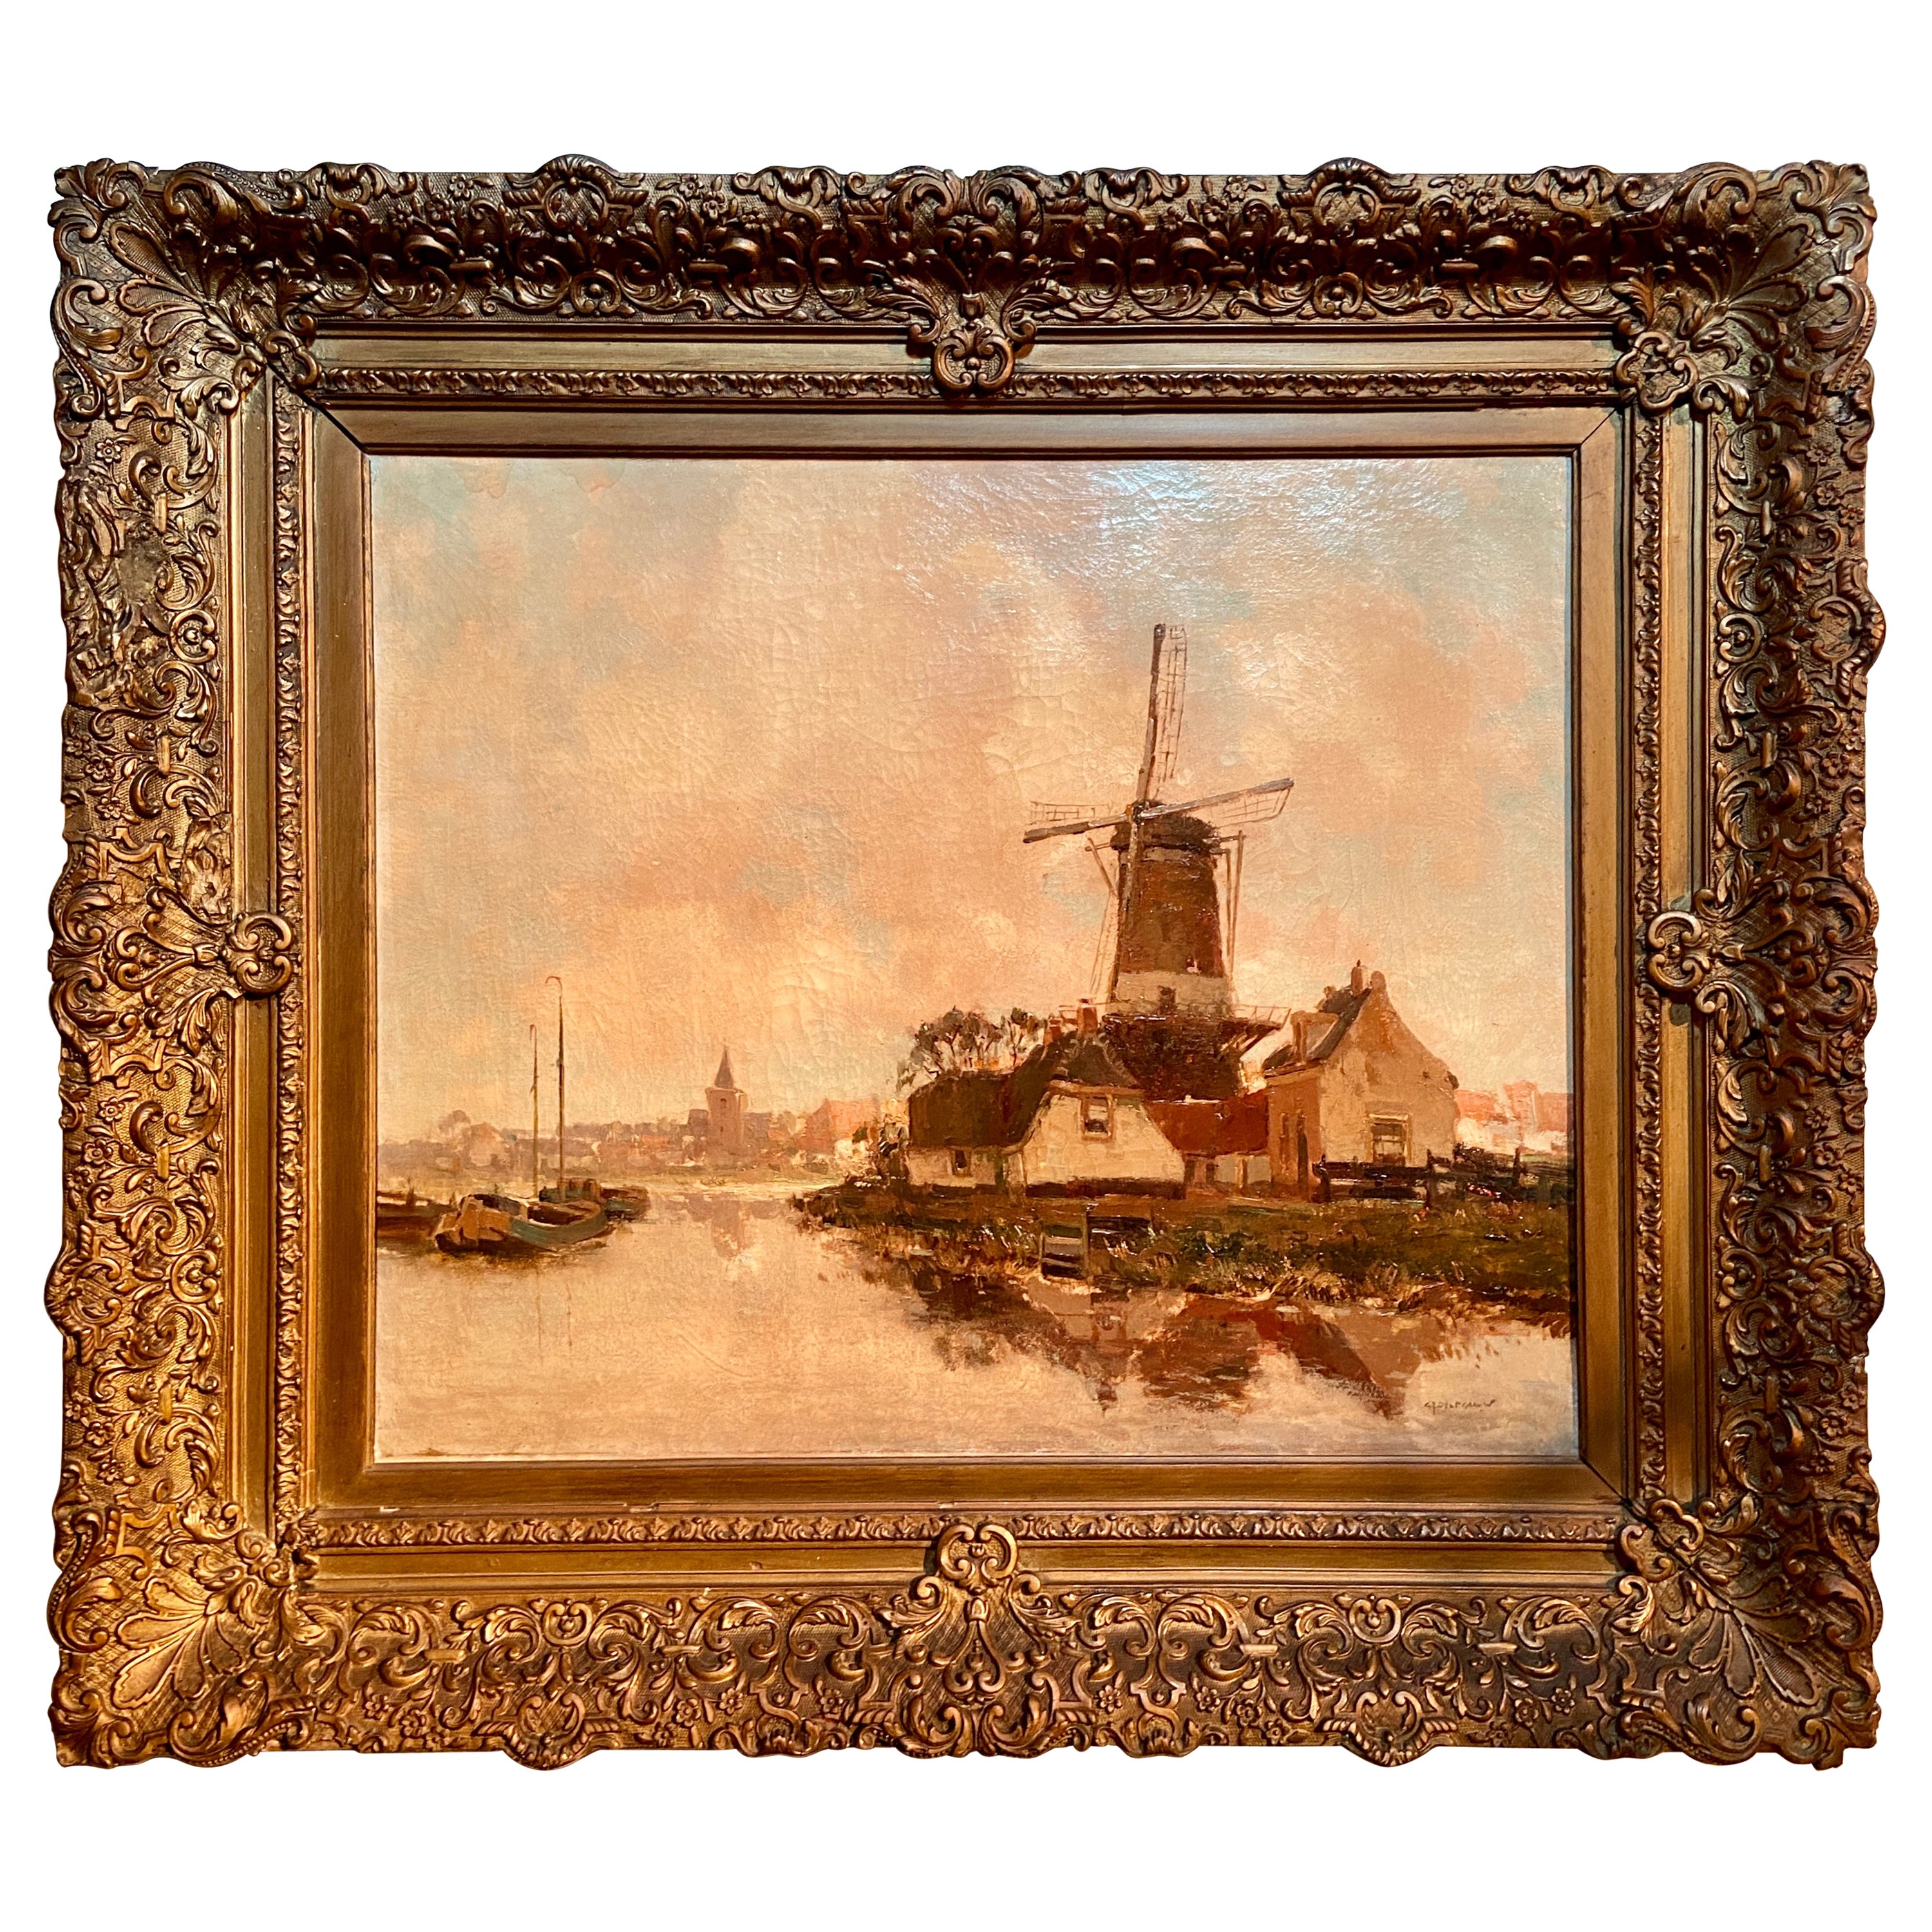 Antique 19th Century Dutch Oil Painting of Windmill Signed "G. J. Delfgauw"